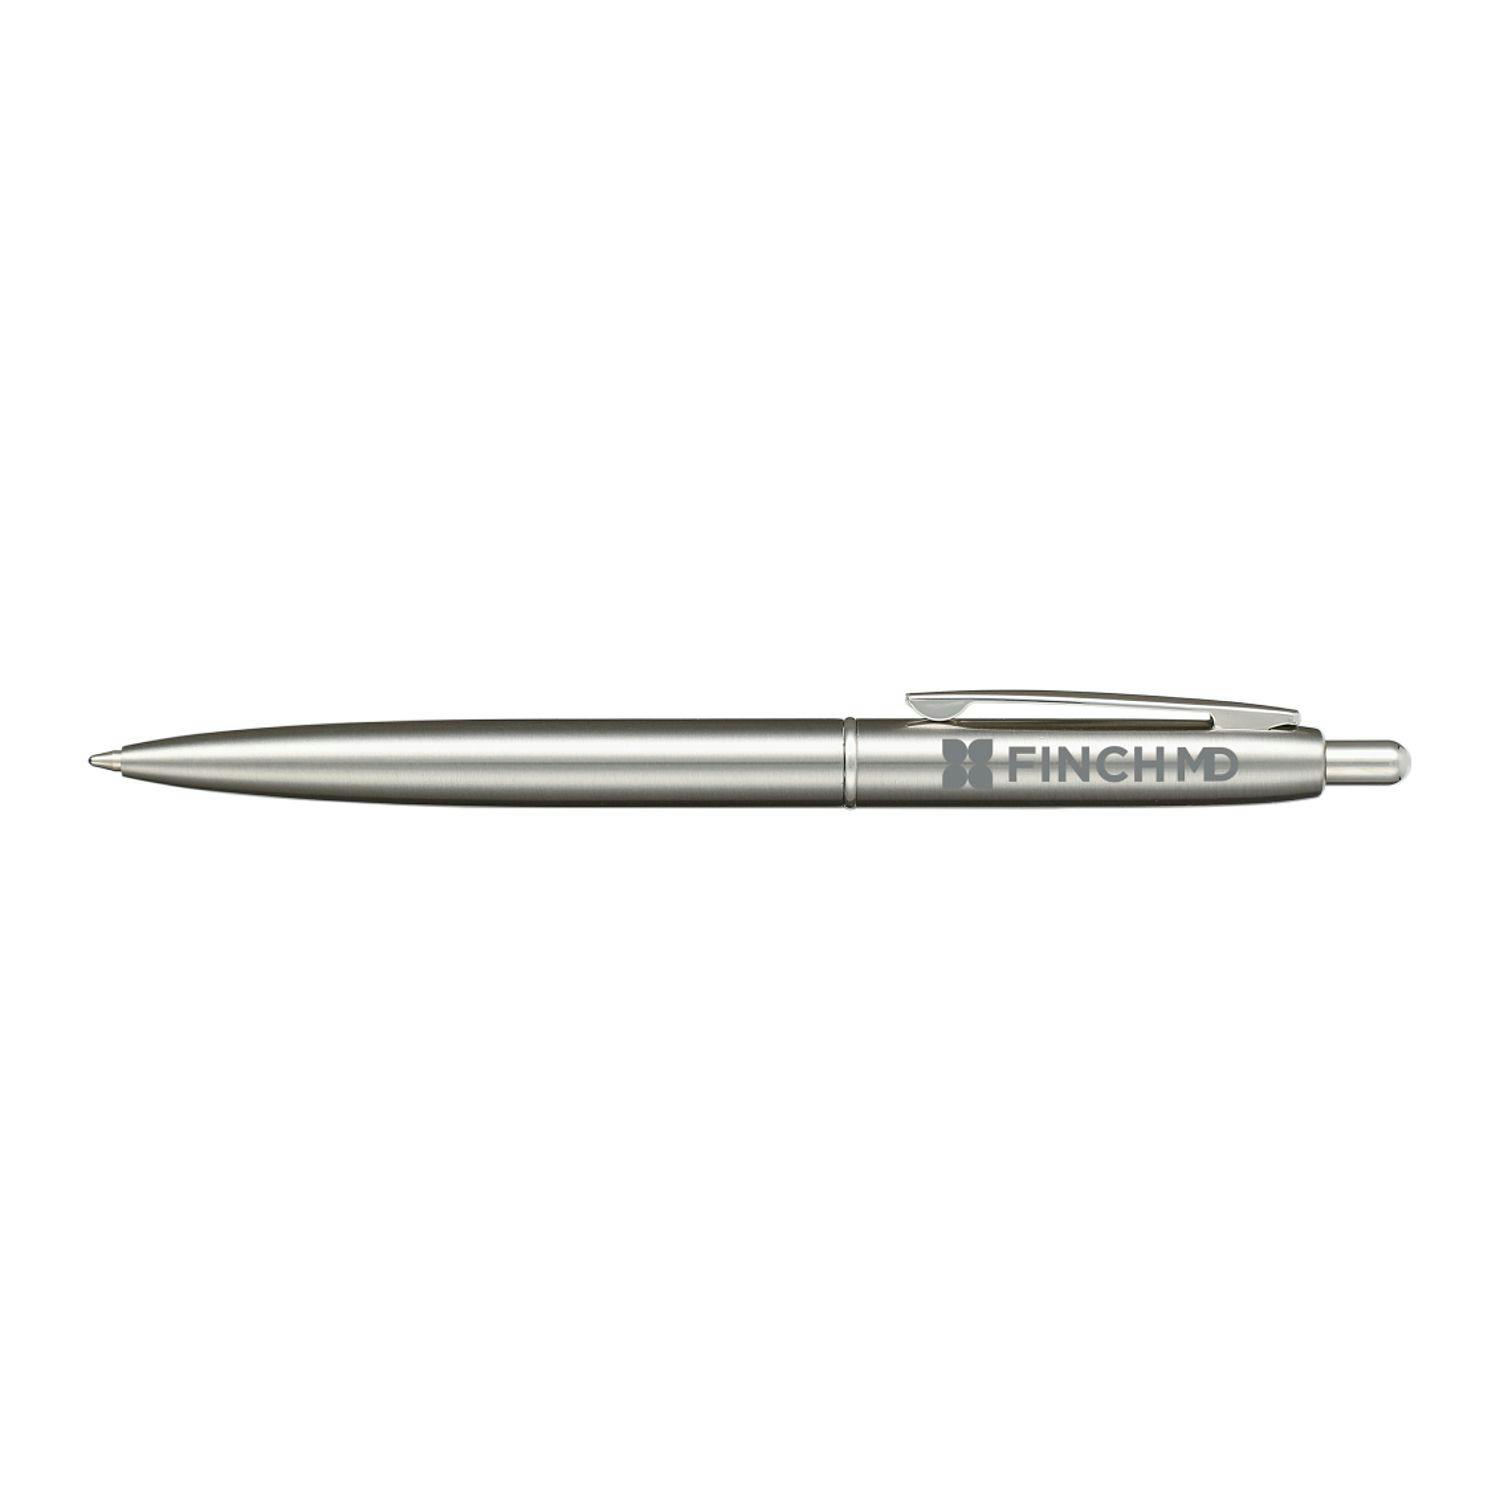 Recycled Stainless Steel Ballpoint Pen - additional Image 1